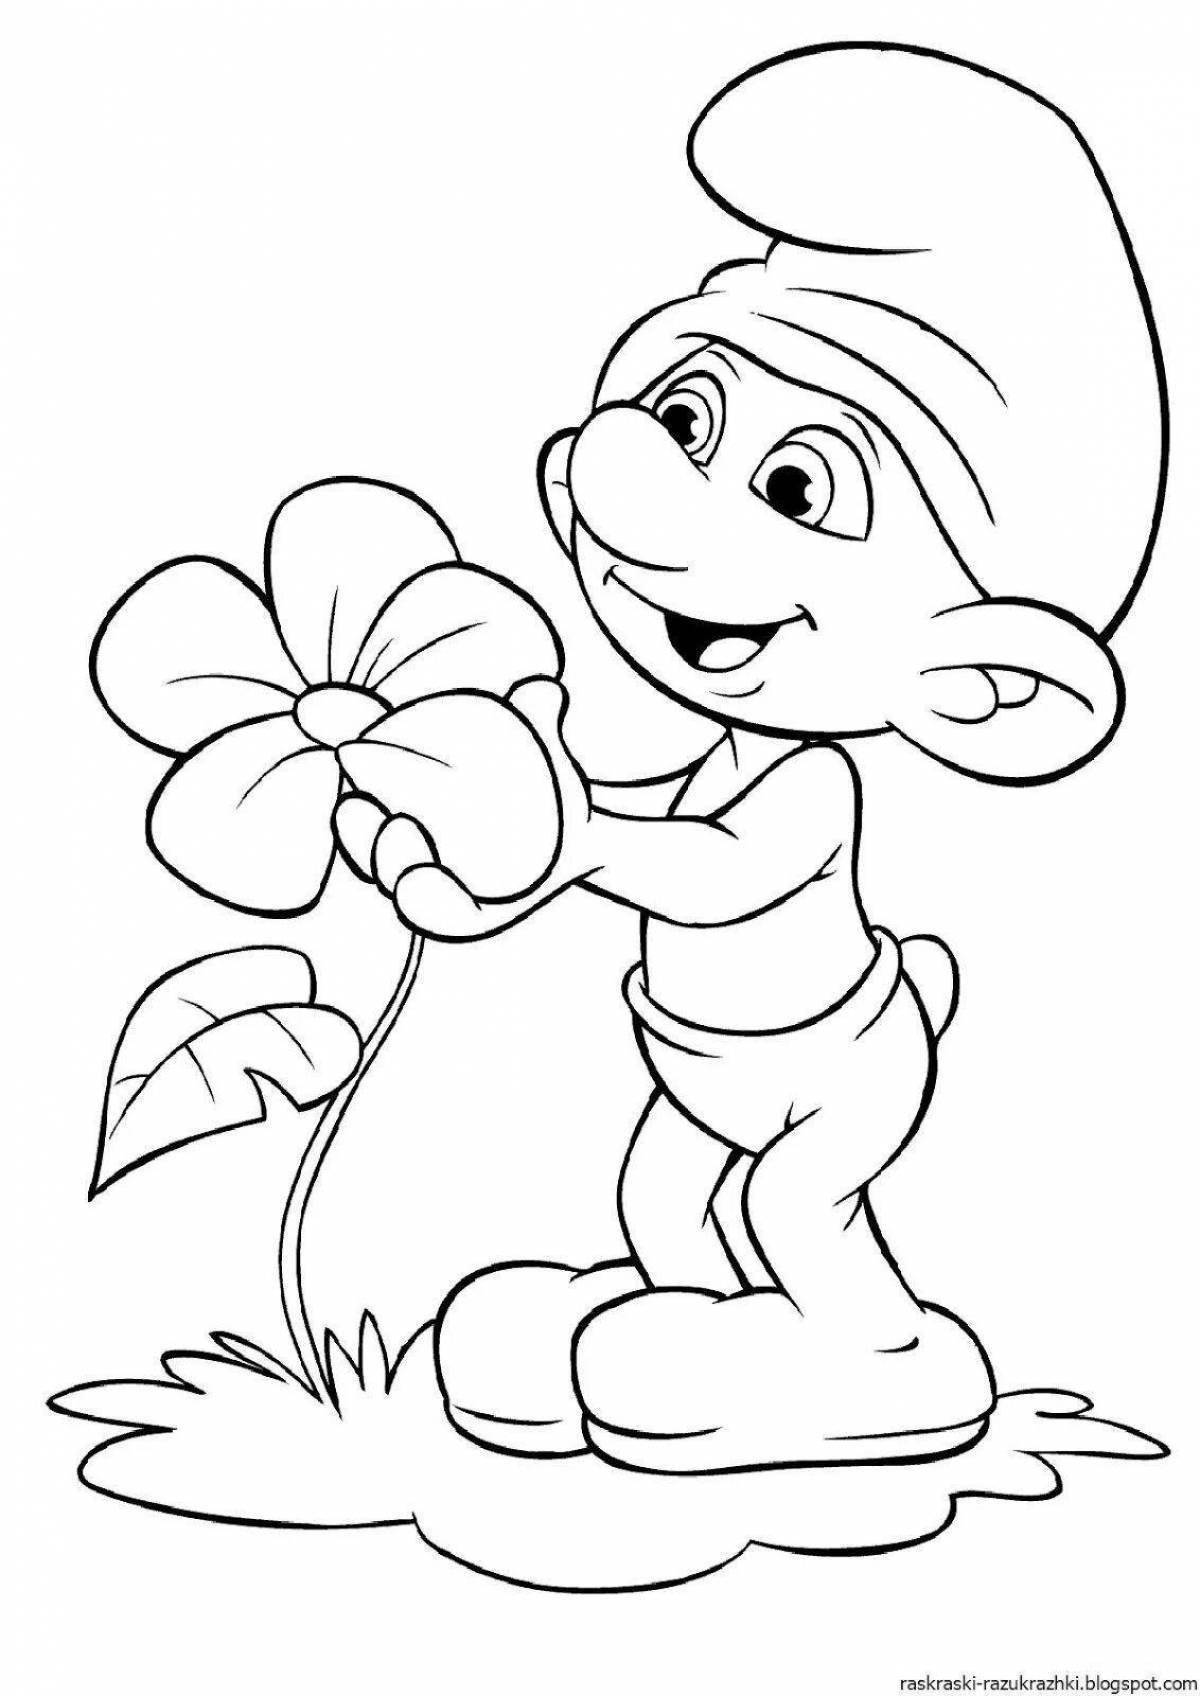 Coloring pages with playful cartoon characters for kids